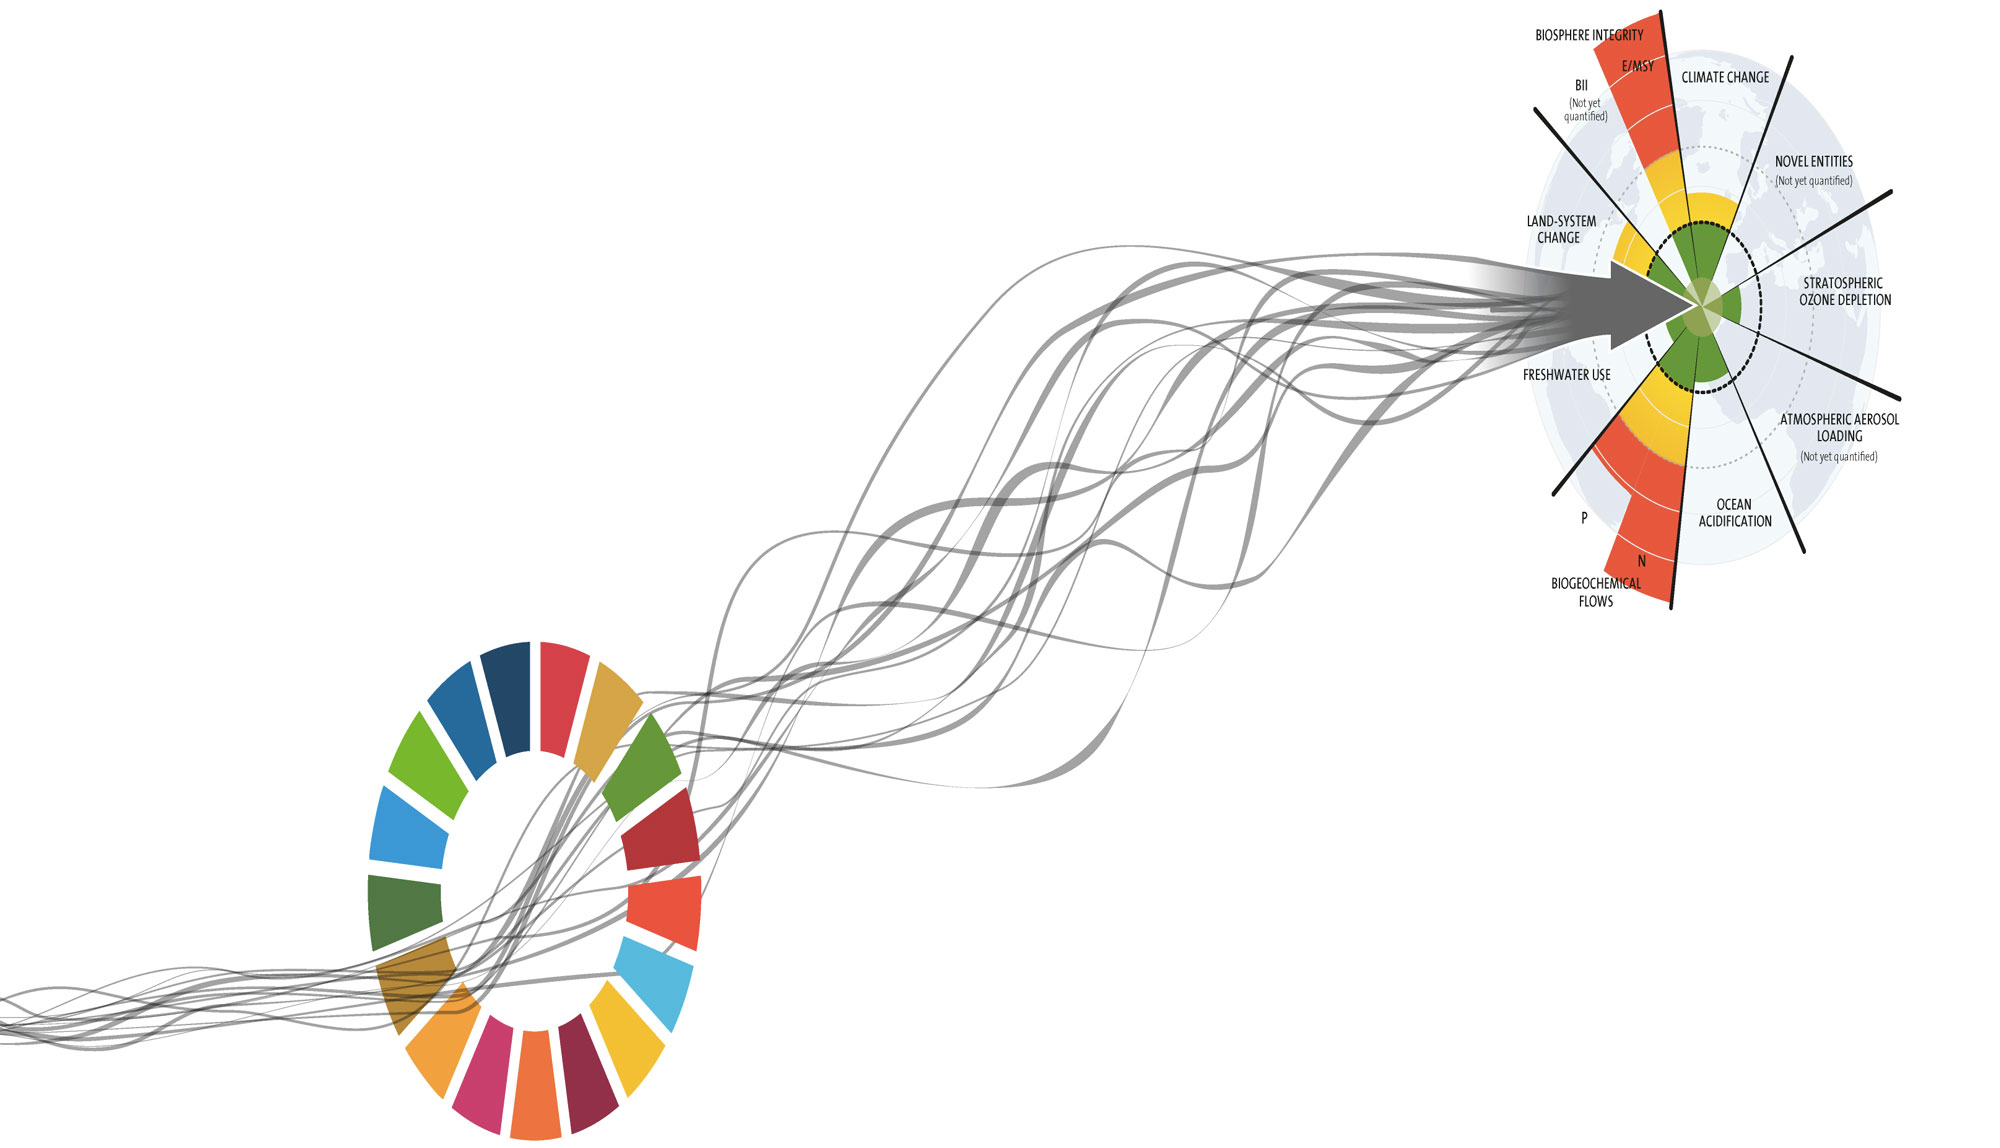 World in 2050 pathways: Meeting the SDGs by 2030 and a world economy growing within the planetary boundaries by 2050. Illustration copyright: J. Lokrantz/Azote